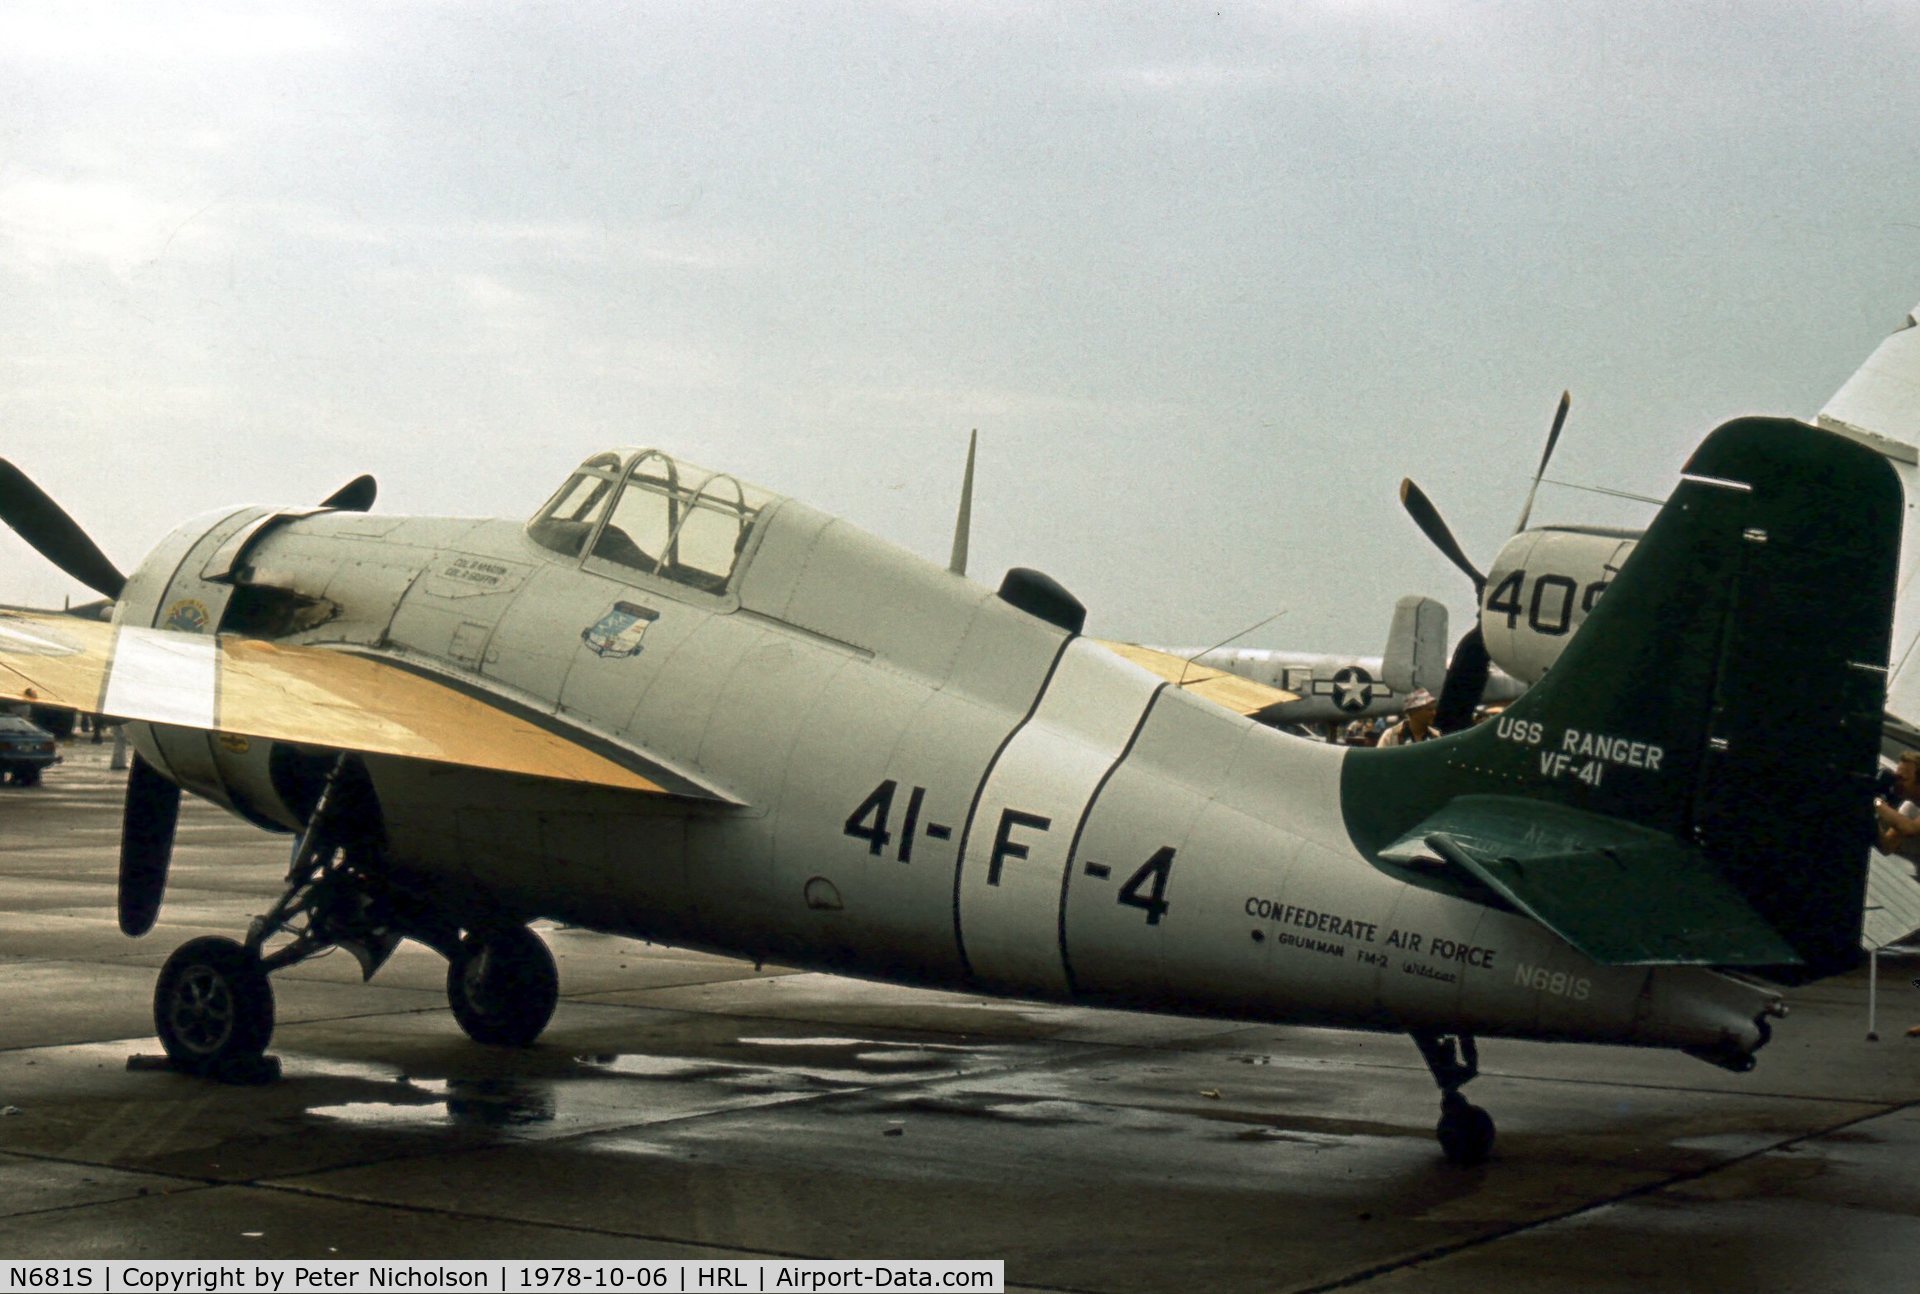 N681S, 1944 General Motors FM-2 Wildcat C/N Not found (USN55585), Another view of the Confederate Air Force Wildcat at their 1978 Airshow.